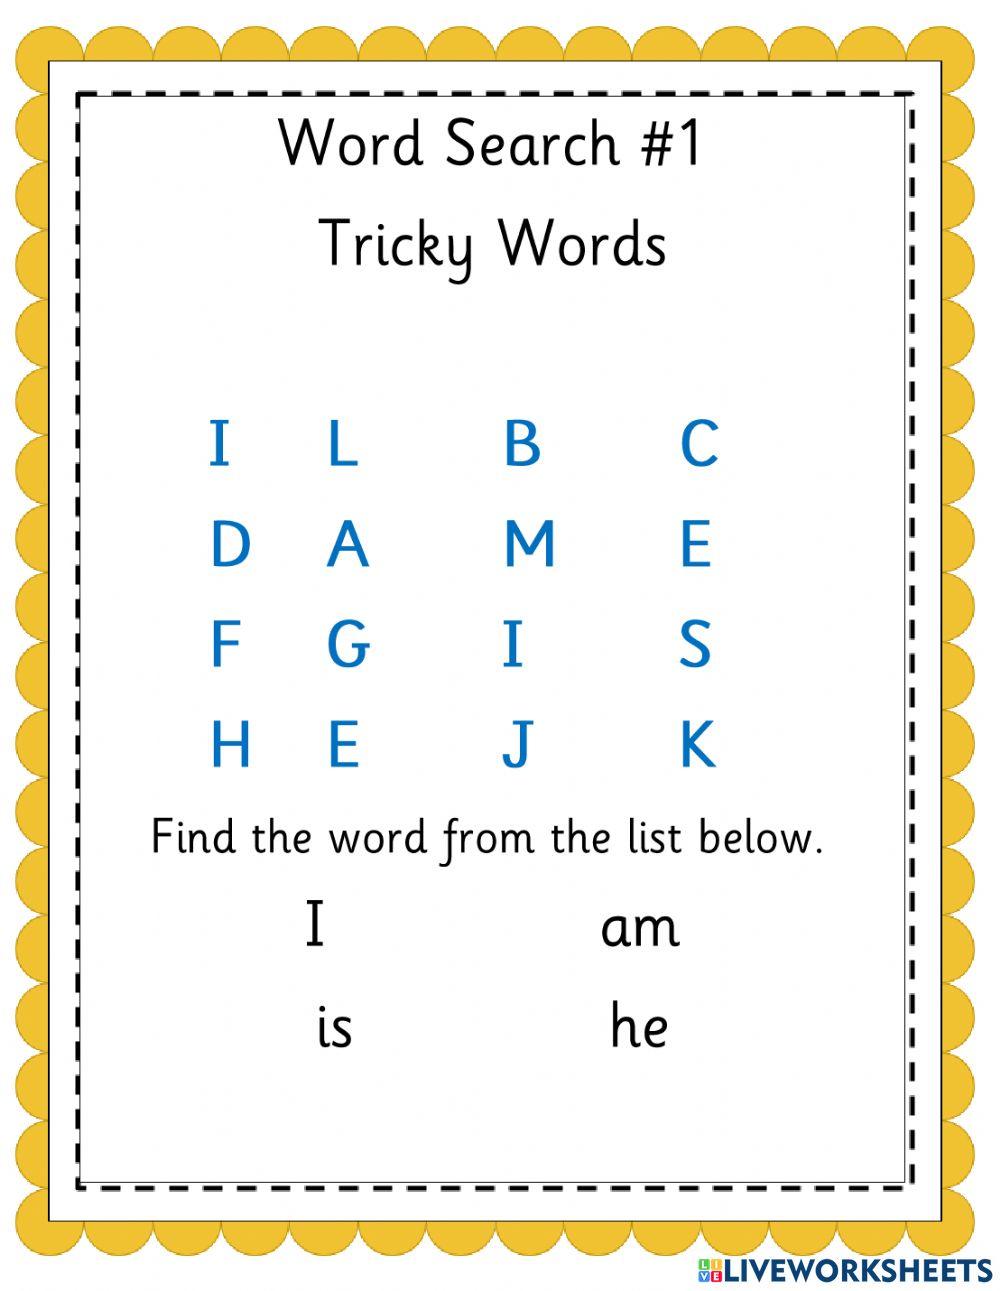 Tricky Words Word Search -1